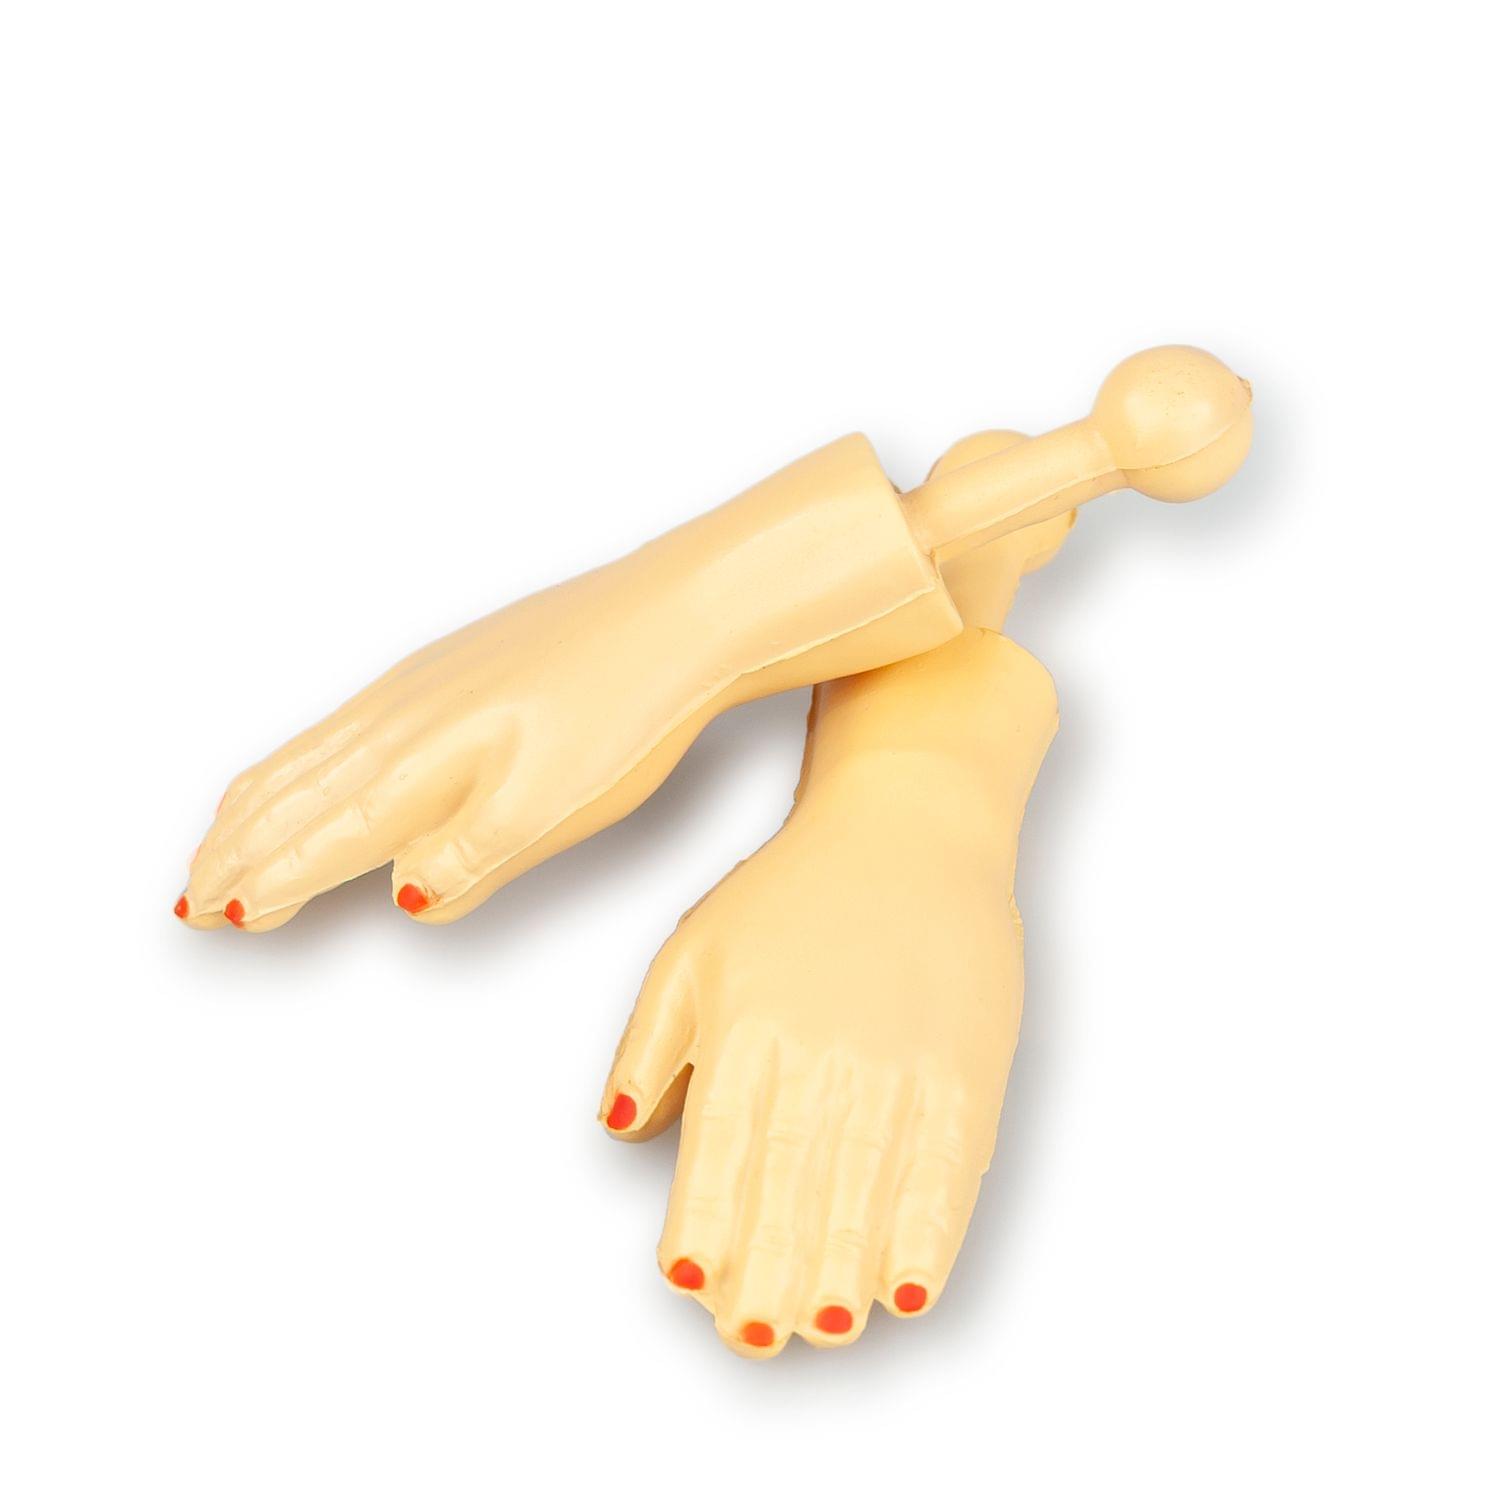 Tiny Hands Prank Novelty Item | 3 Inches